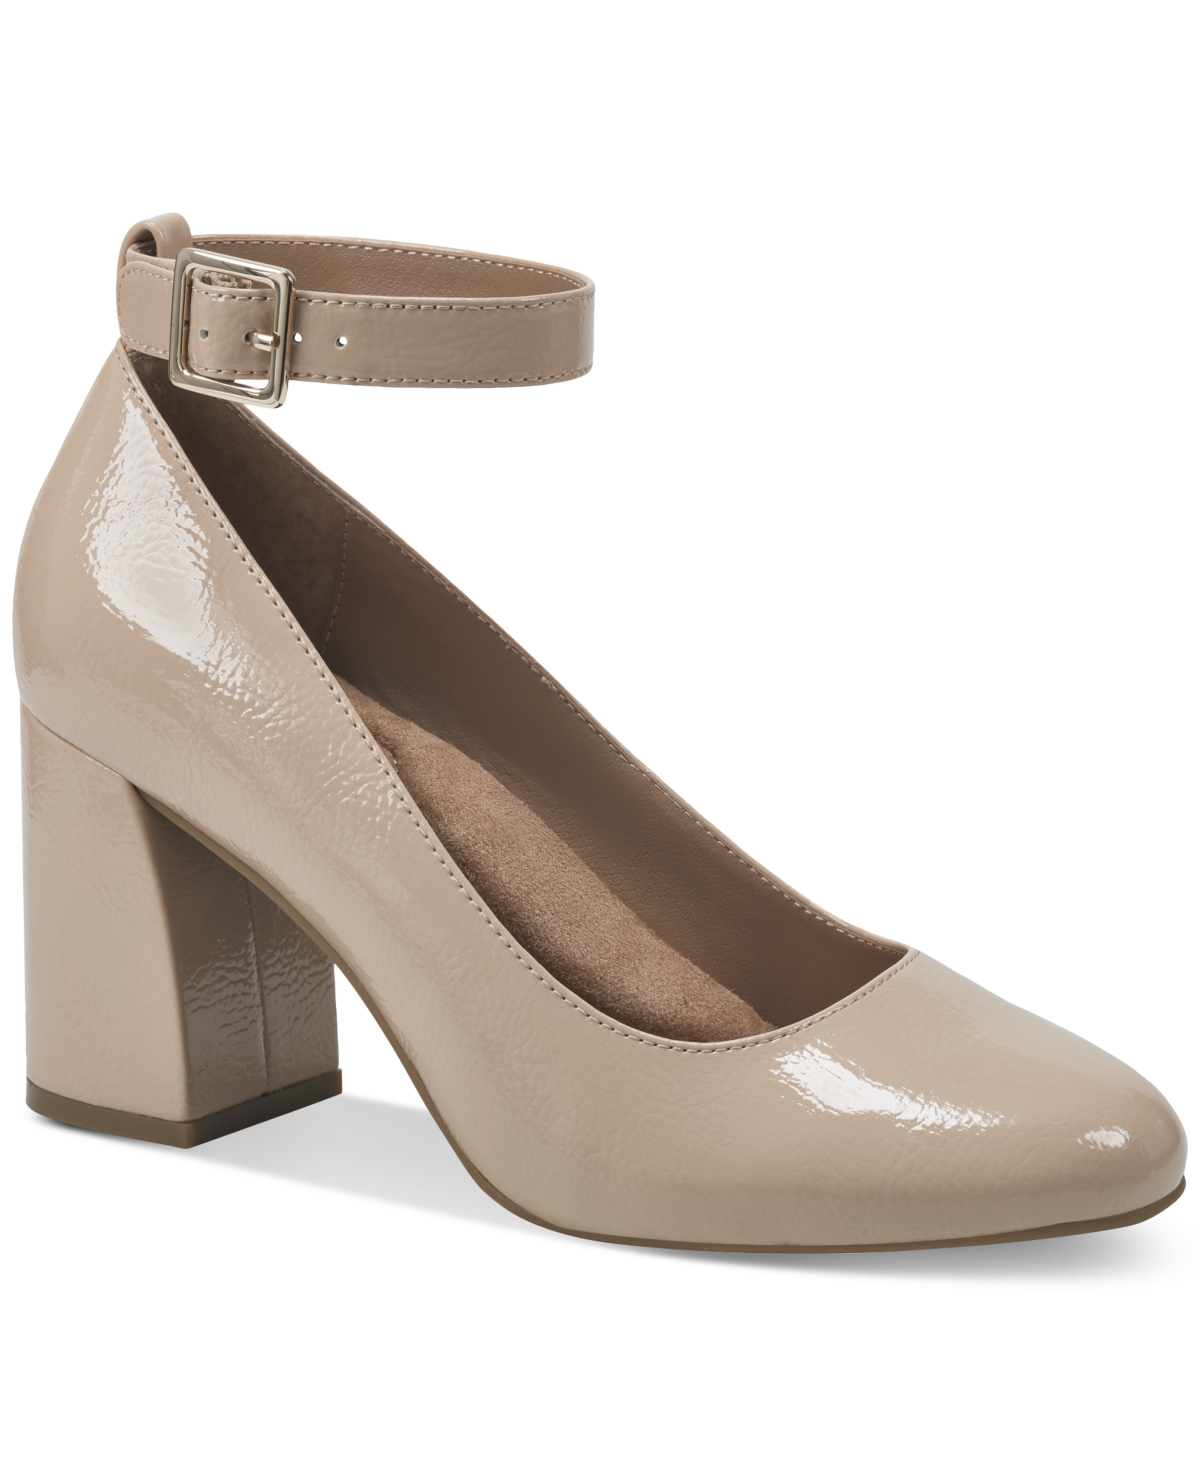 Women's Valentinaa Memory Foam Ankle Strap Block Heel Pumps, Created for Macy's - Nude Patent